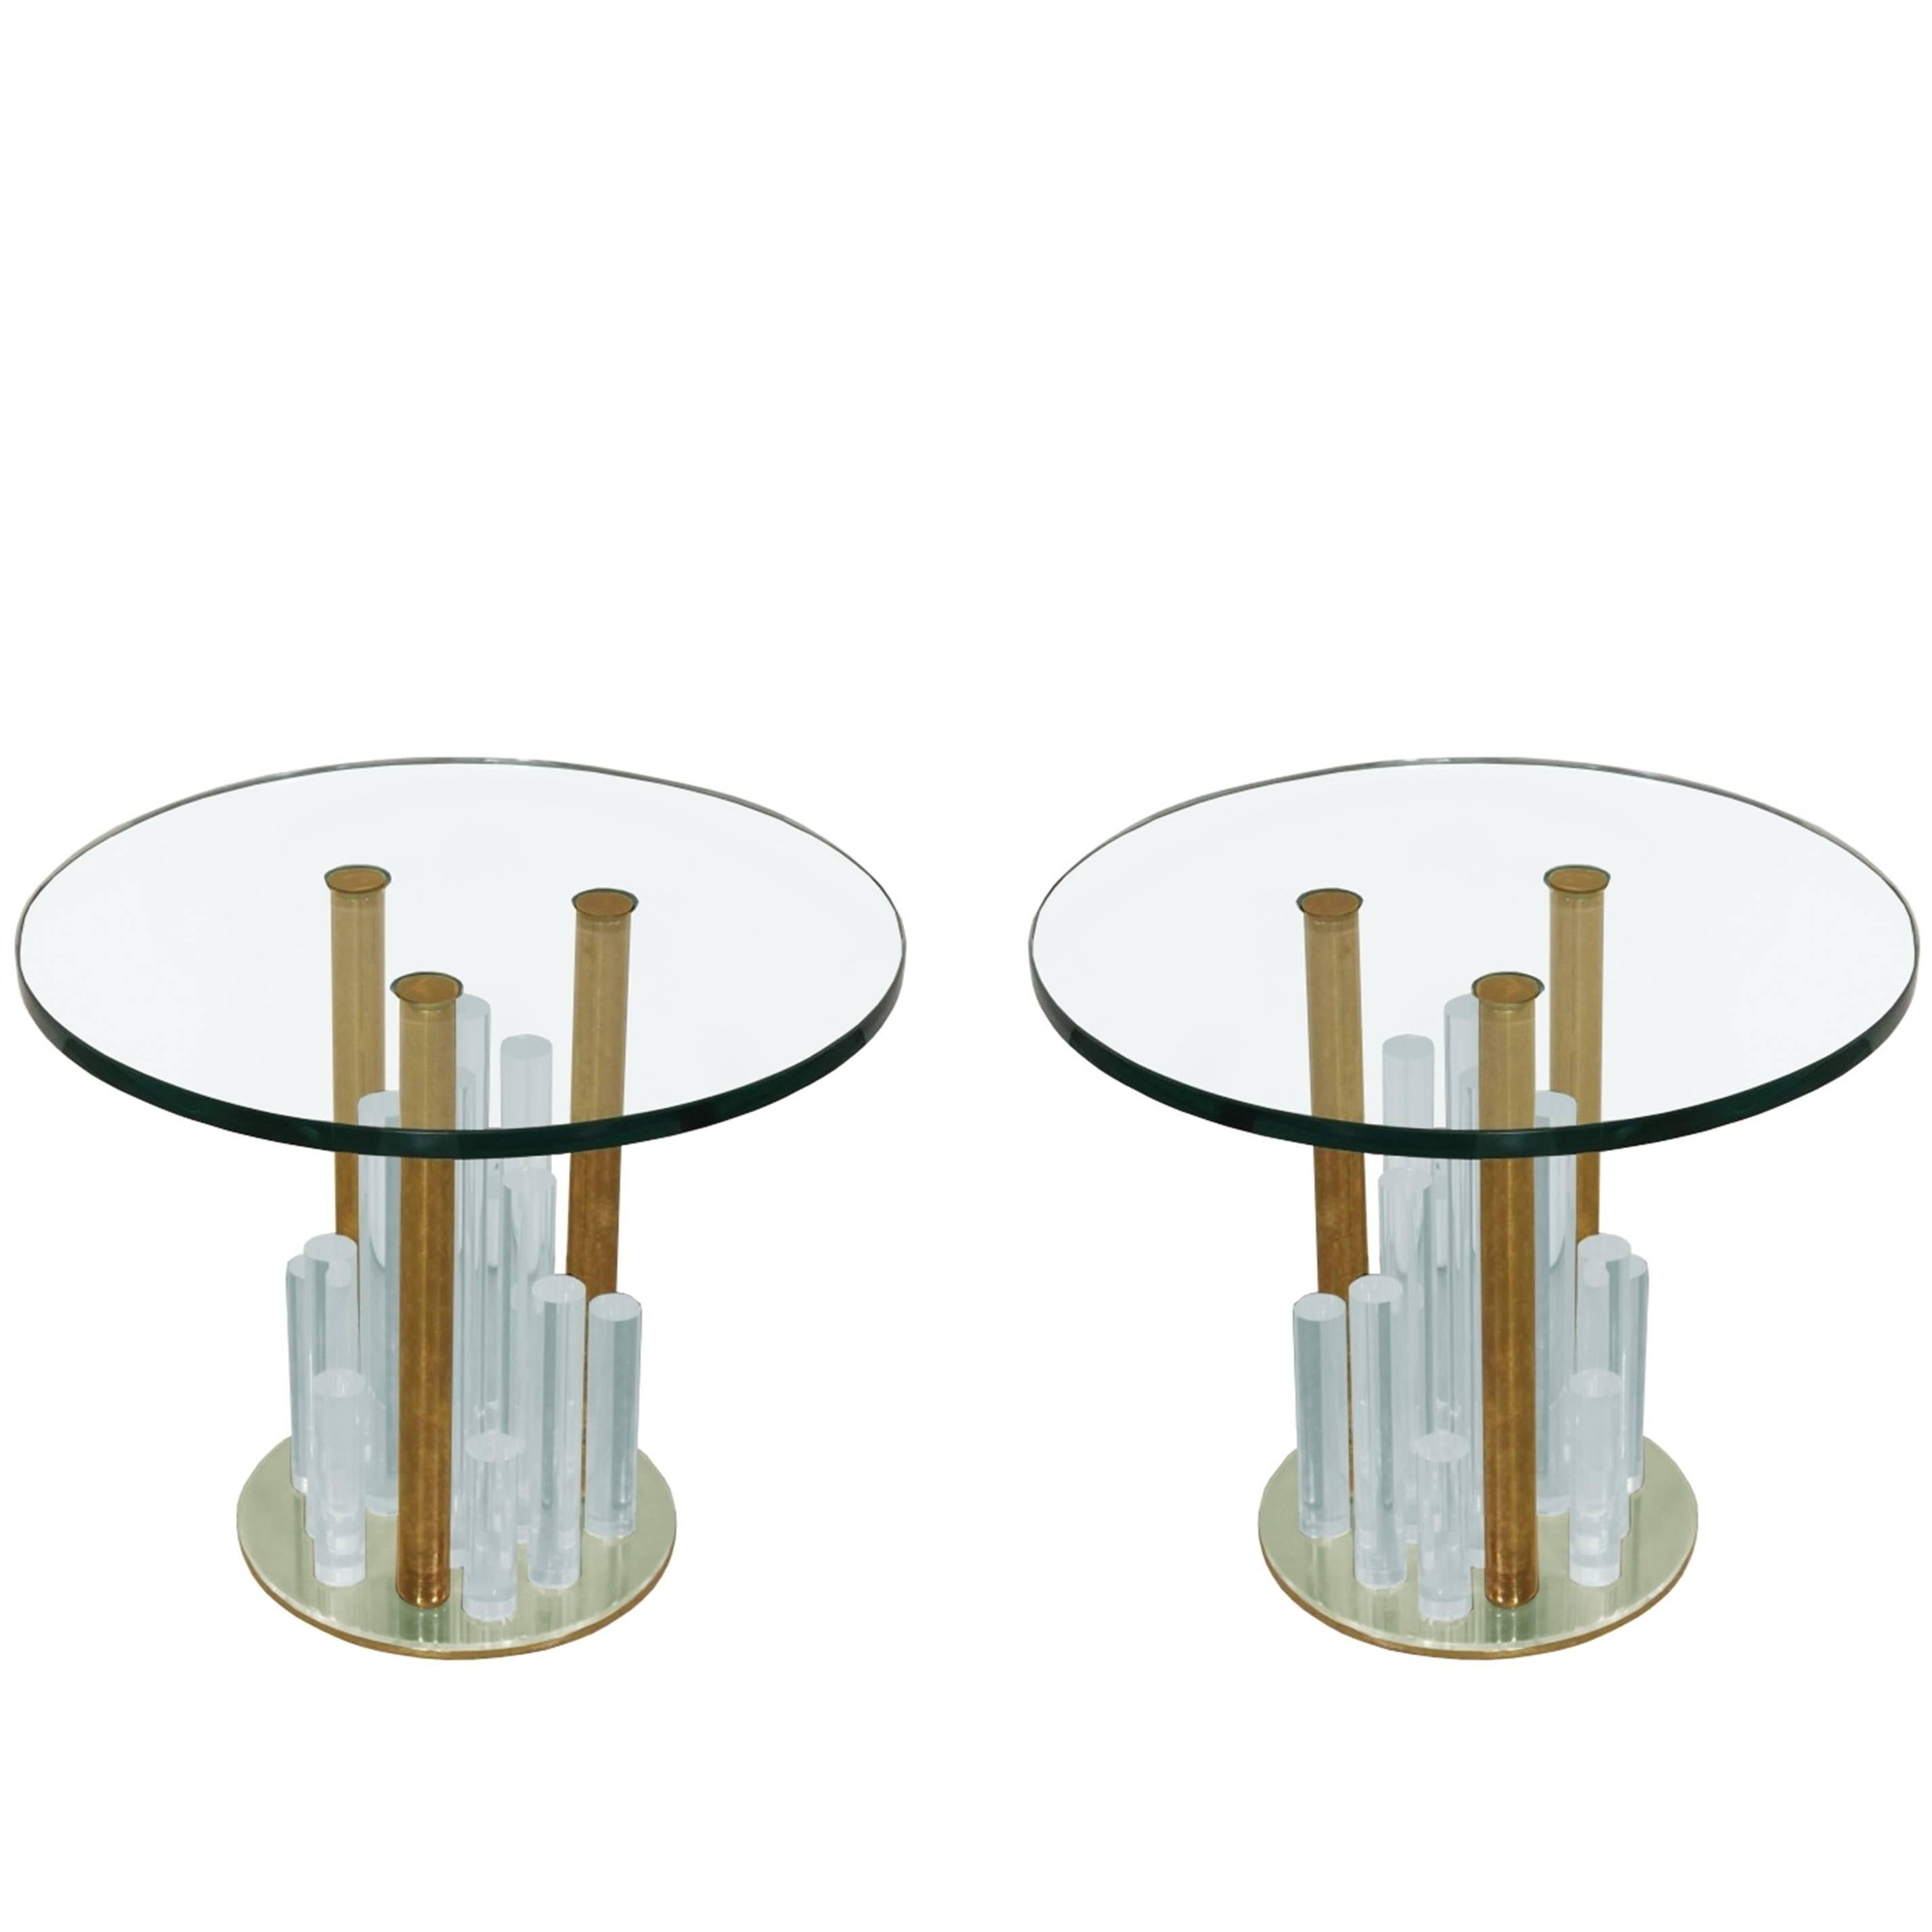 Lucite and Brass "Loretta" Side Tables by Charles Hollis Jones